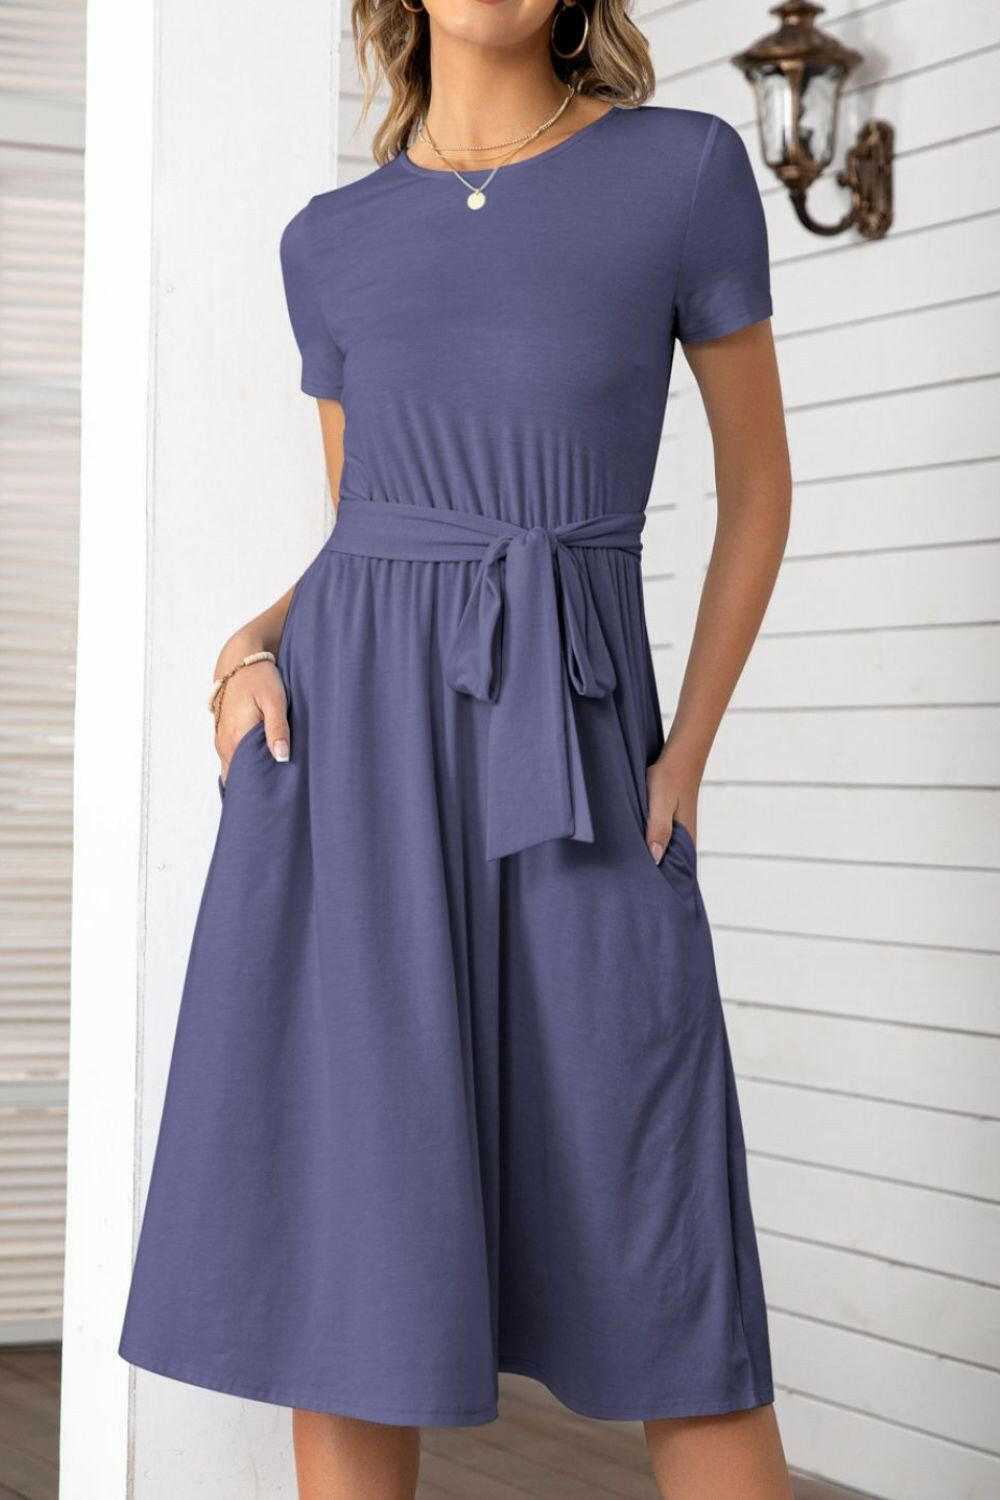 Belted Tee Dress With Pockets.